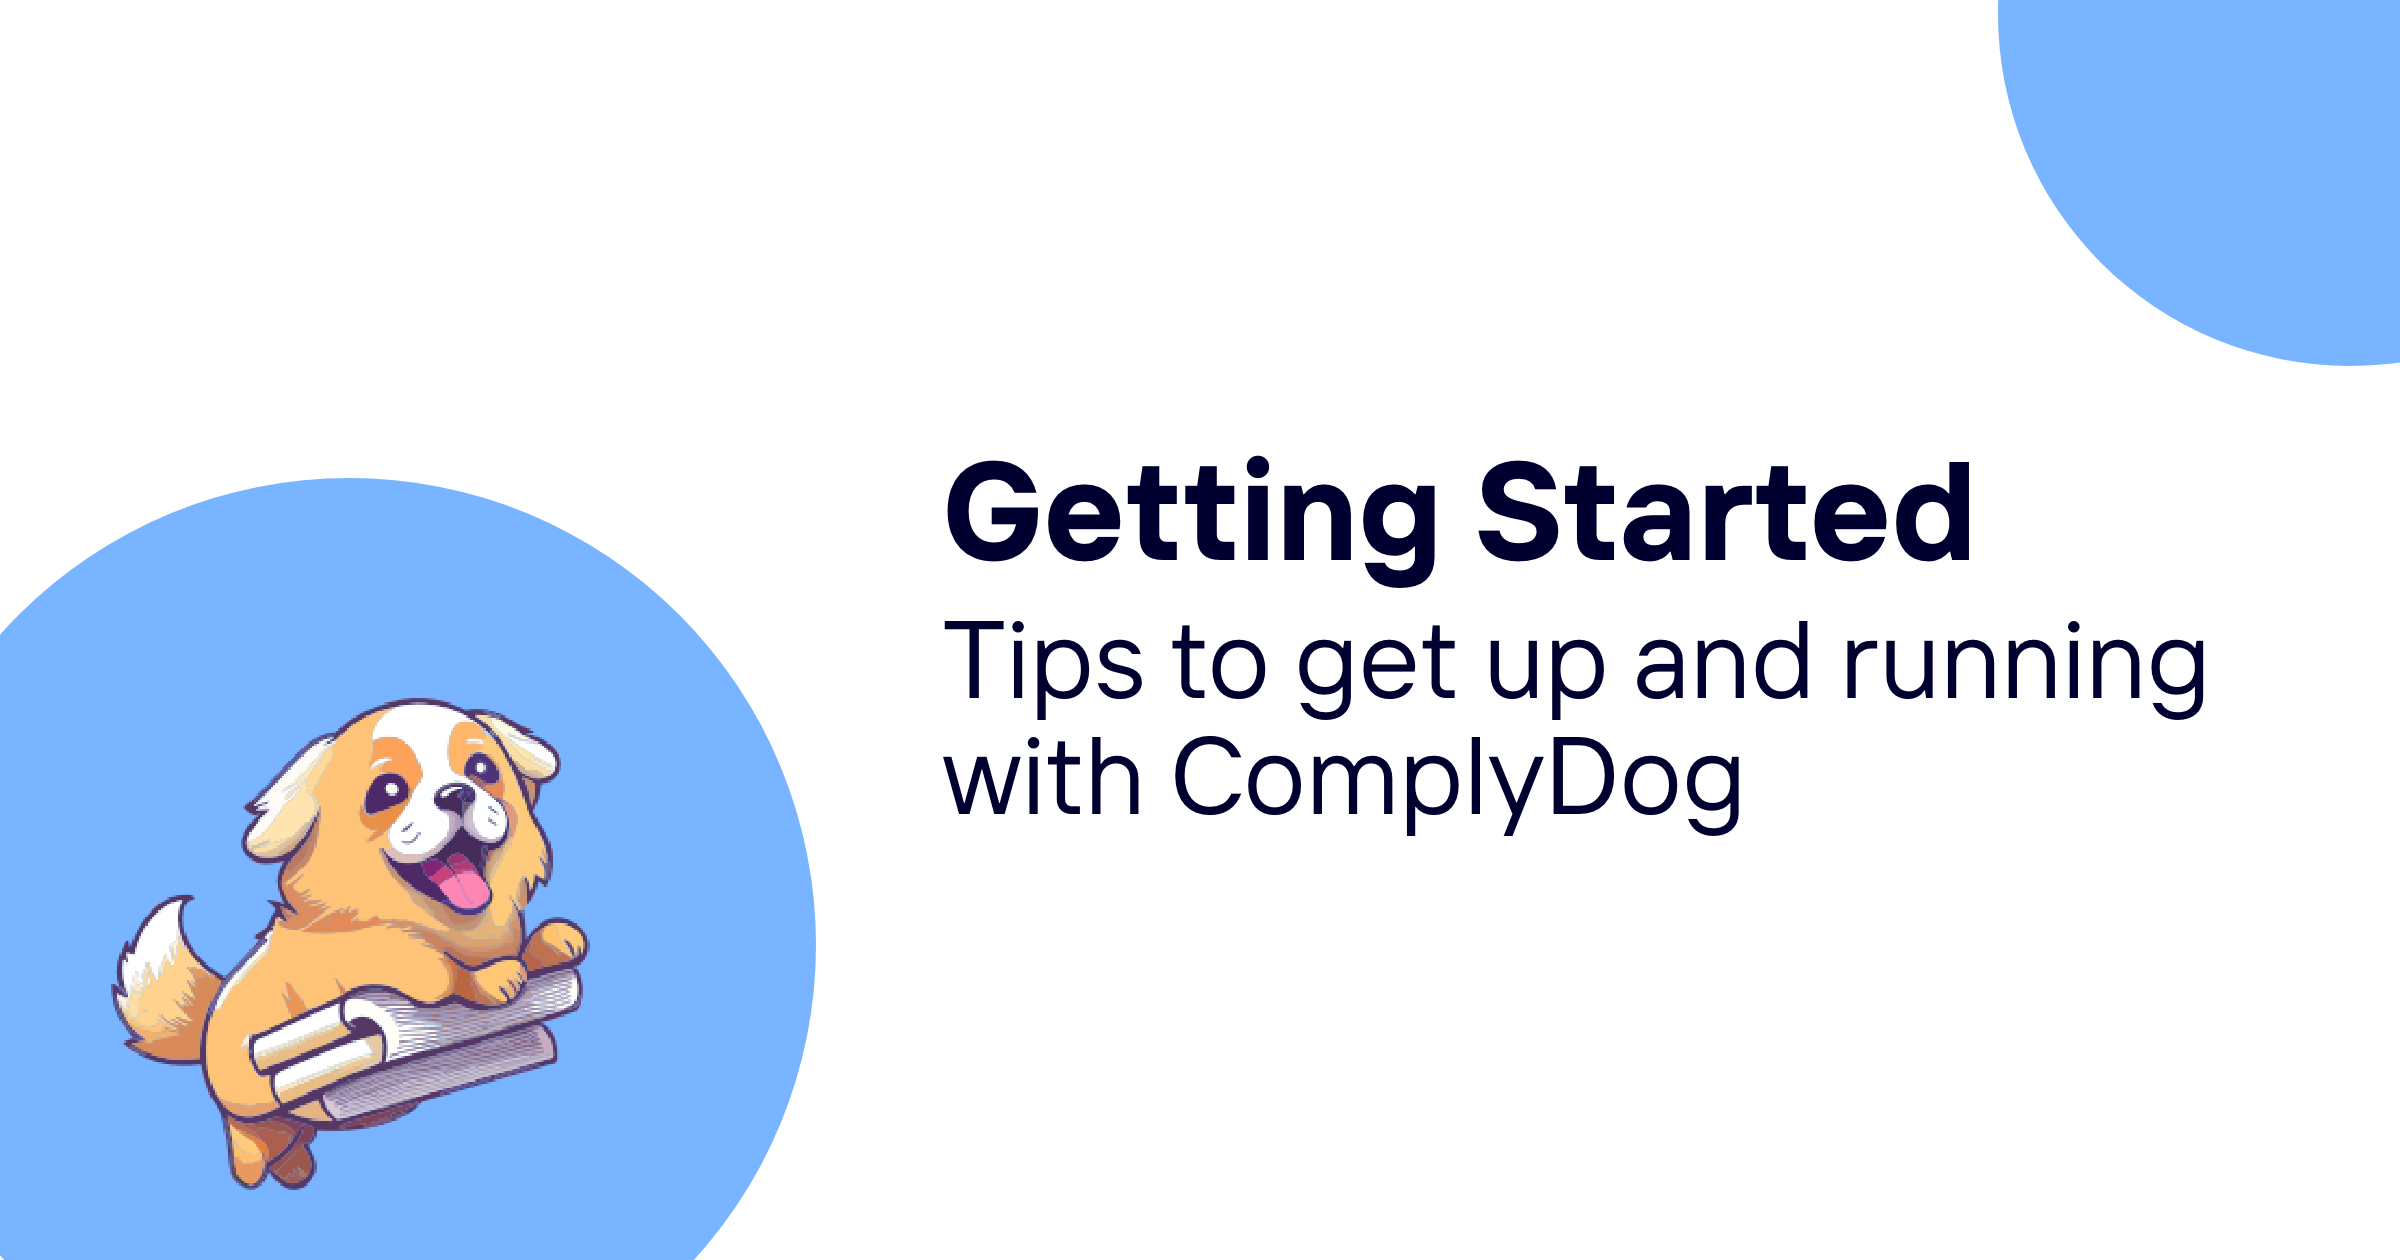 New to ComplyDog? Your Guide to Getting Started